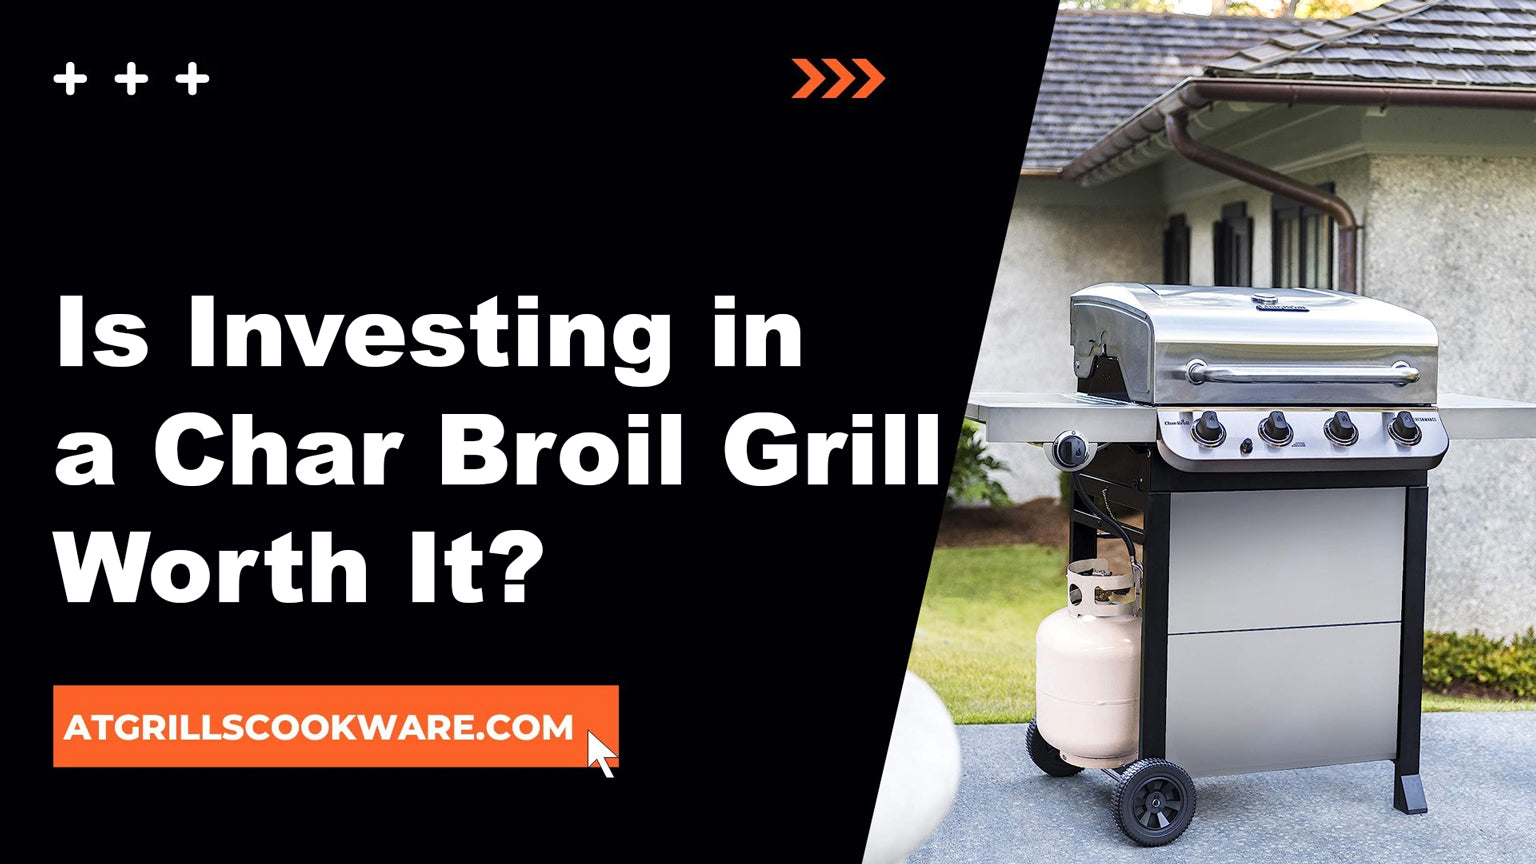 Is Investing in a Char Broil Grill Worth It?